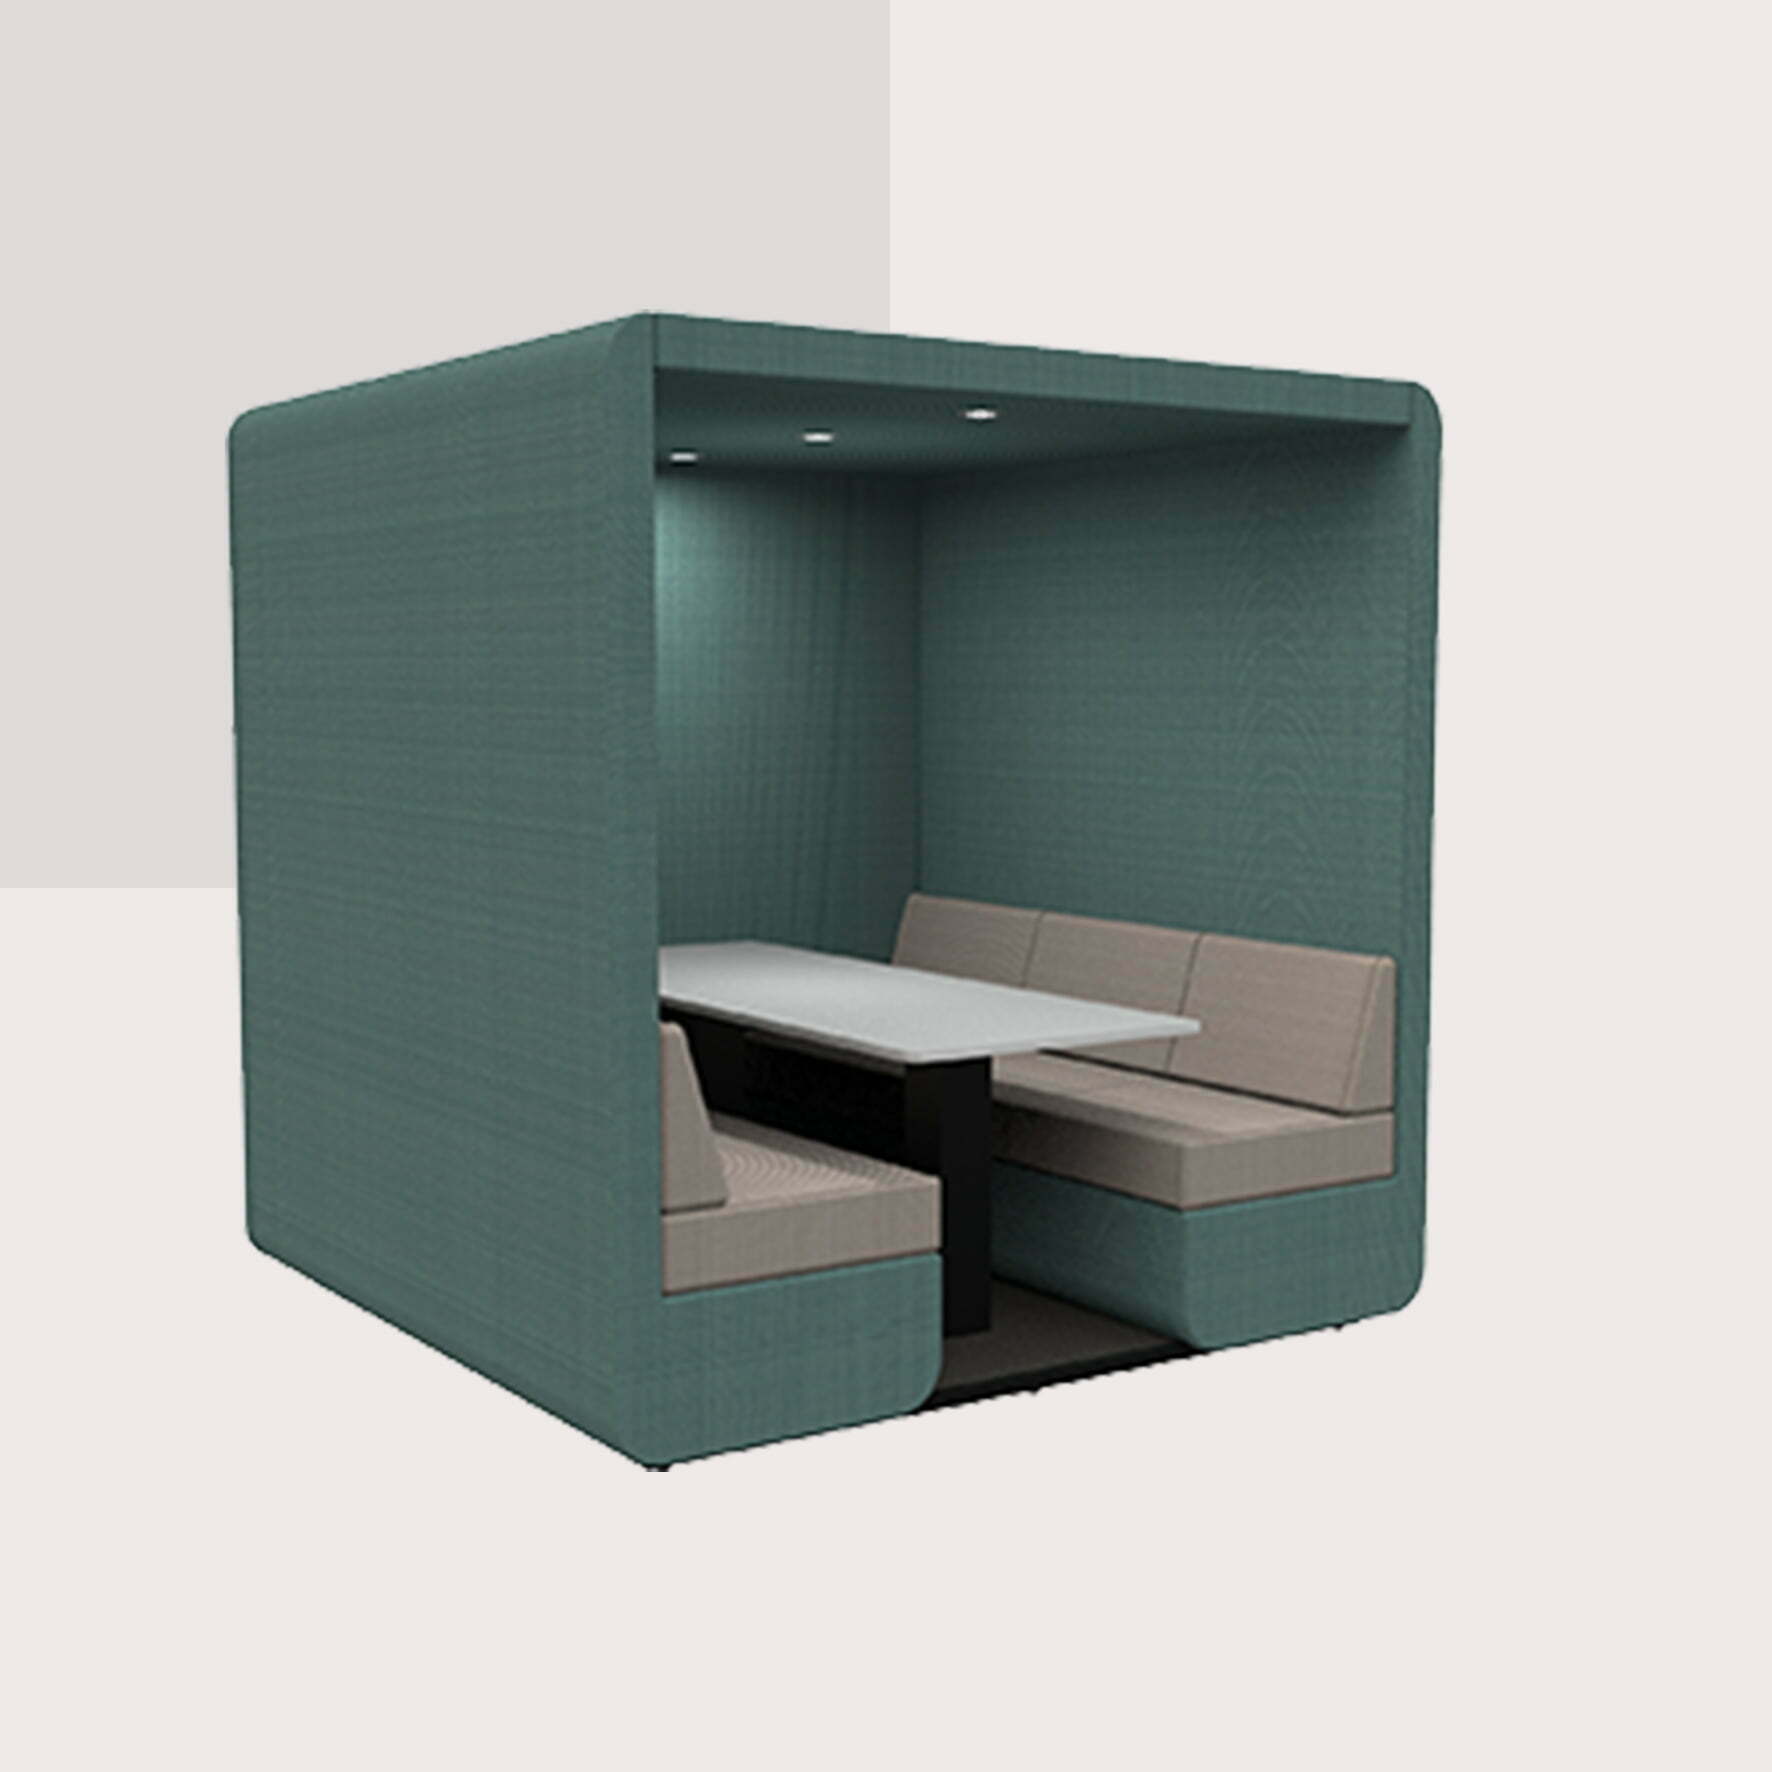 Bob 6 Seat booth with upholstered end wall